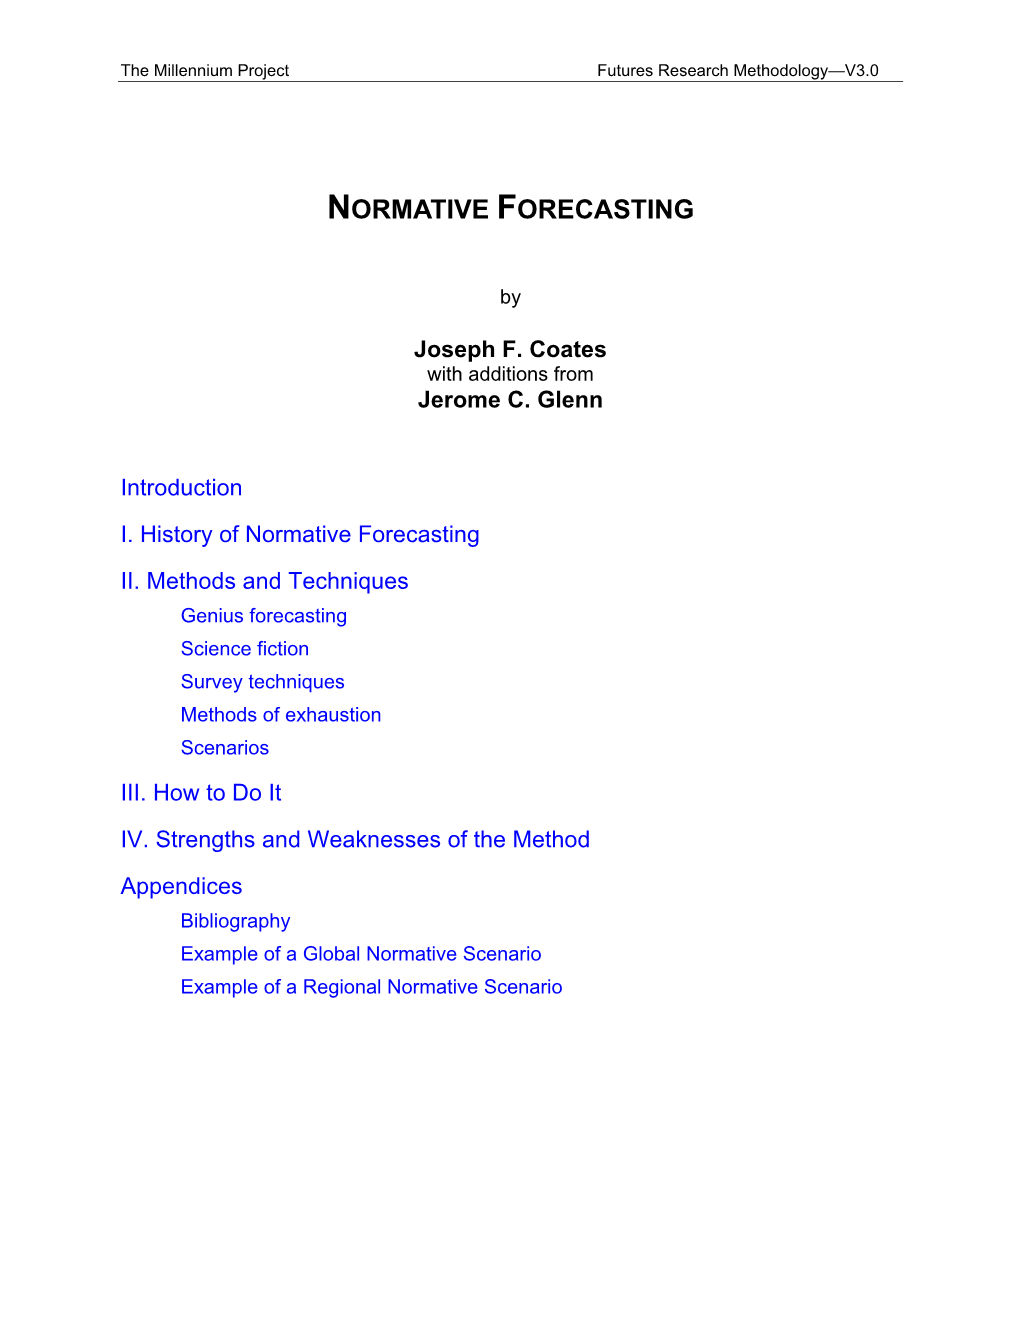 Normative Forecasting